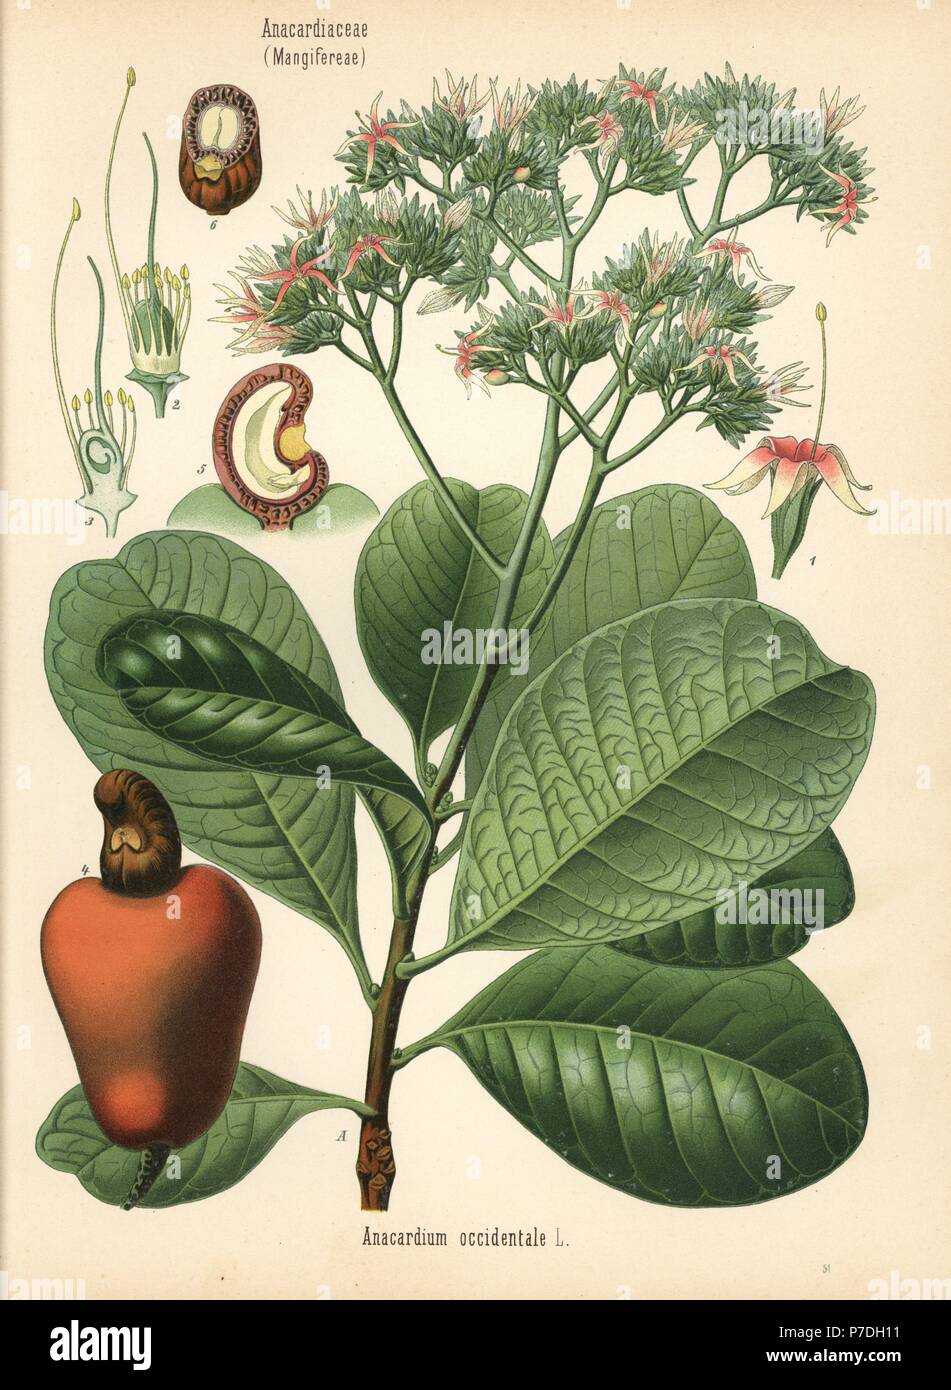 Cashew nut tree, Anacardium occidentale. Chromolithograph after a botanical illustration from Hermann Adolph Koehler's Medicinal Plants, edited by Gustav Pabst, Koehler, Germany, 1887. Stock Photo